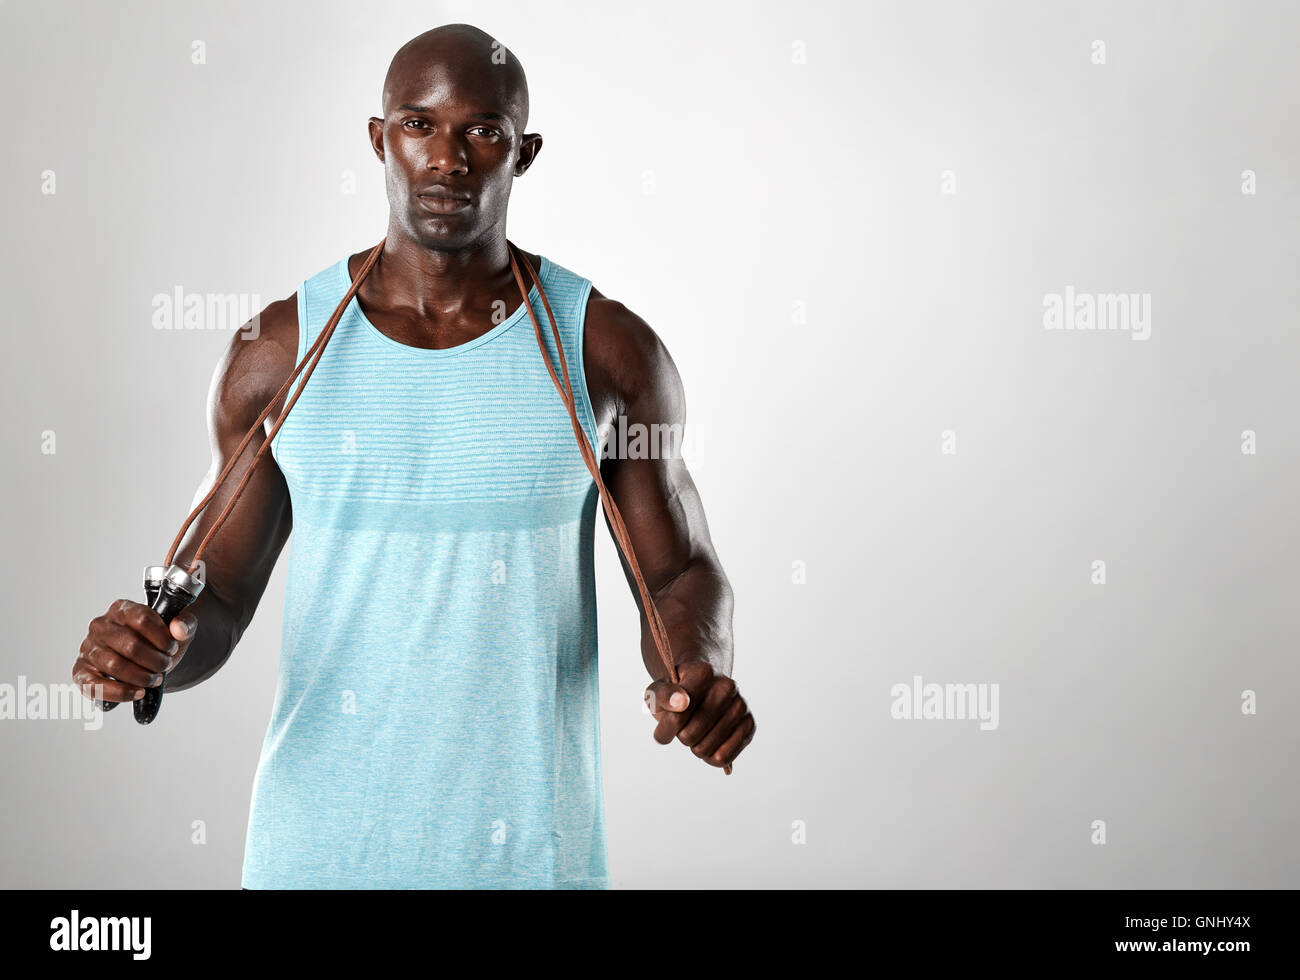 African Fitness Model With Skipping Rope Against Grey Background Handsome Muscular Man Posing